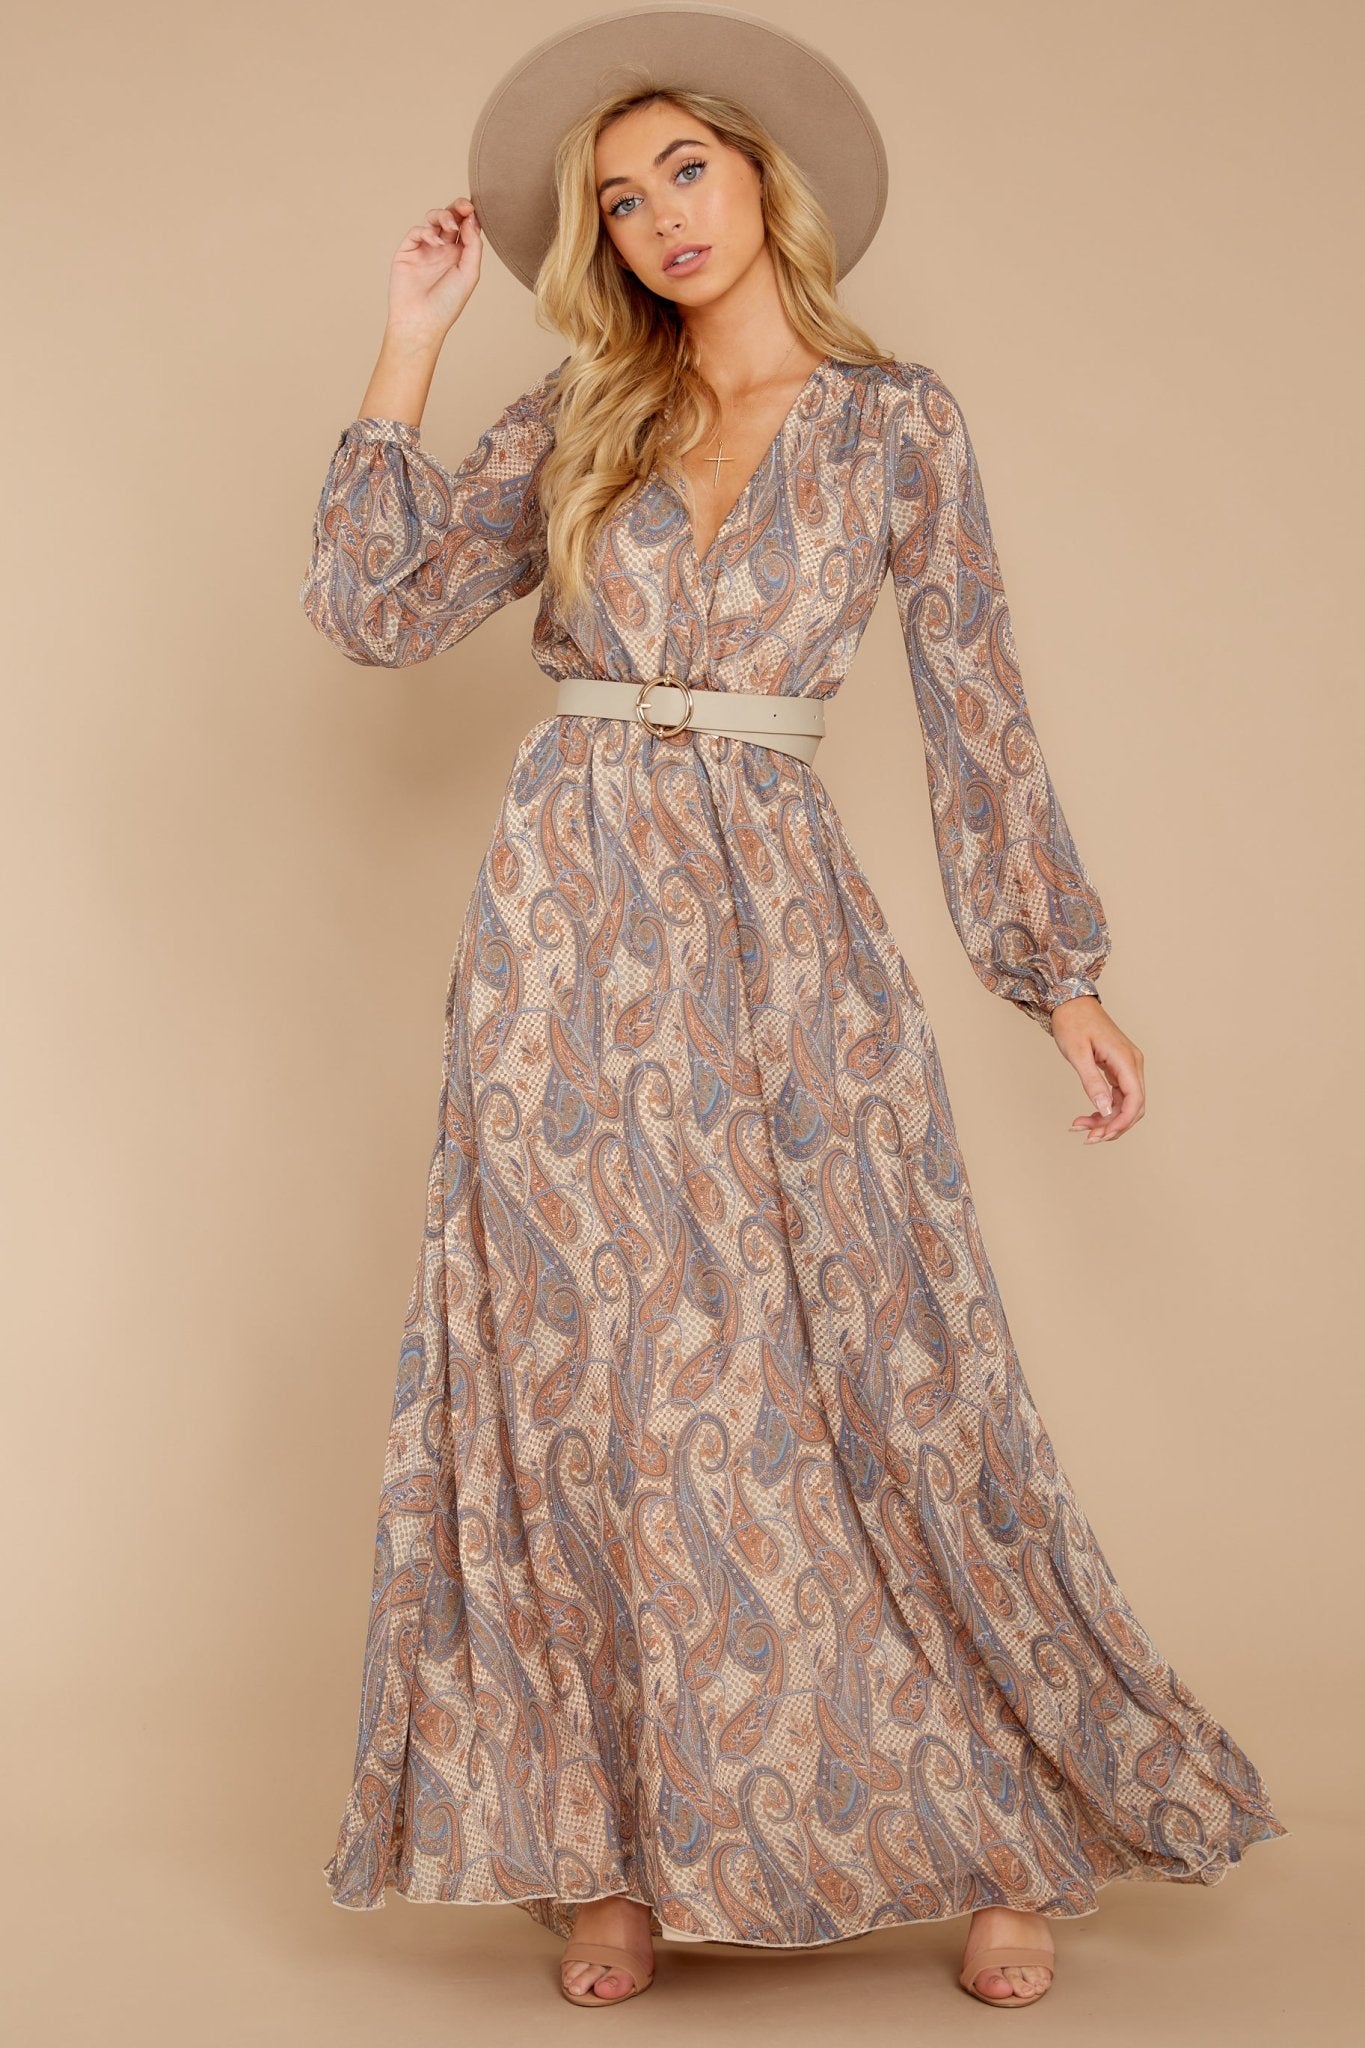 Forgotten Story Taupe Paisley Print Maxi Dress - Red Dress